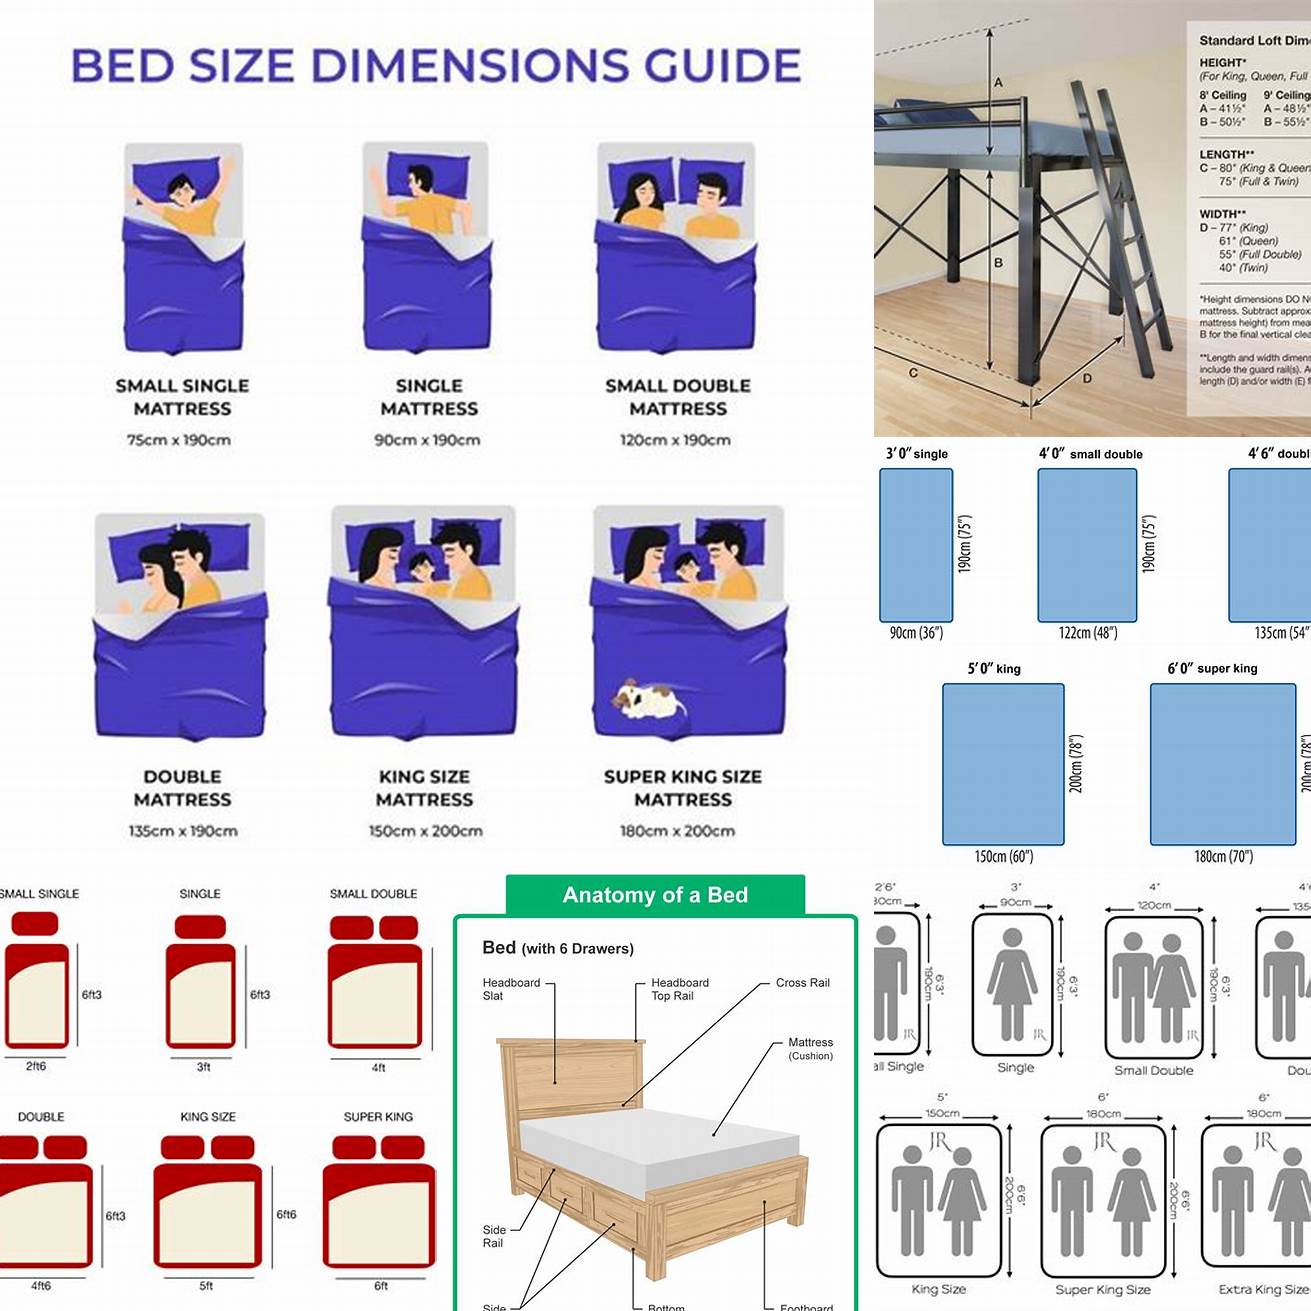 Consider the weight of the bed